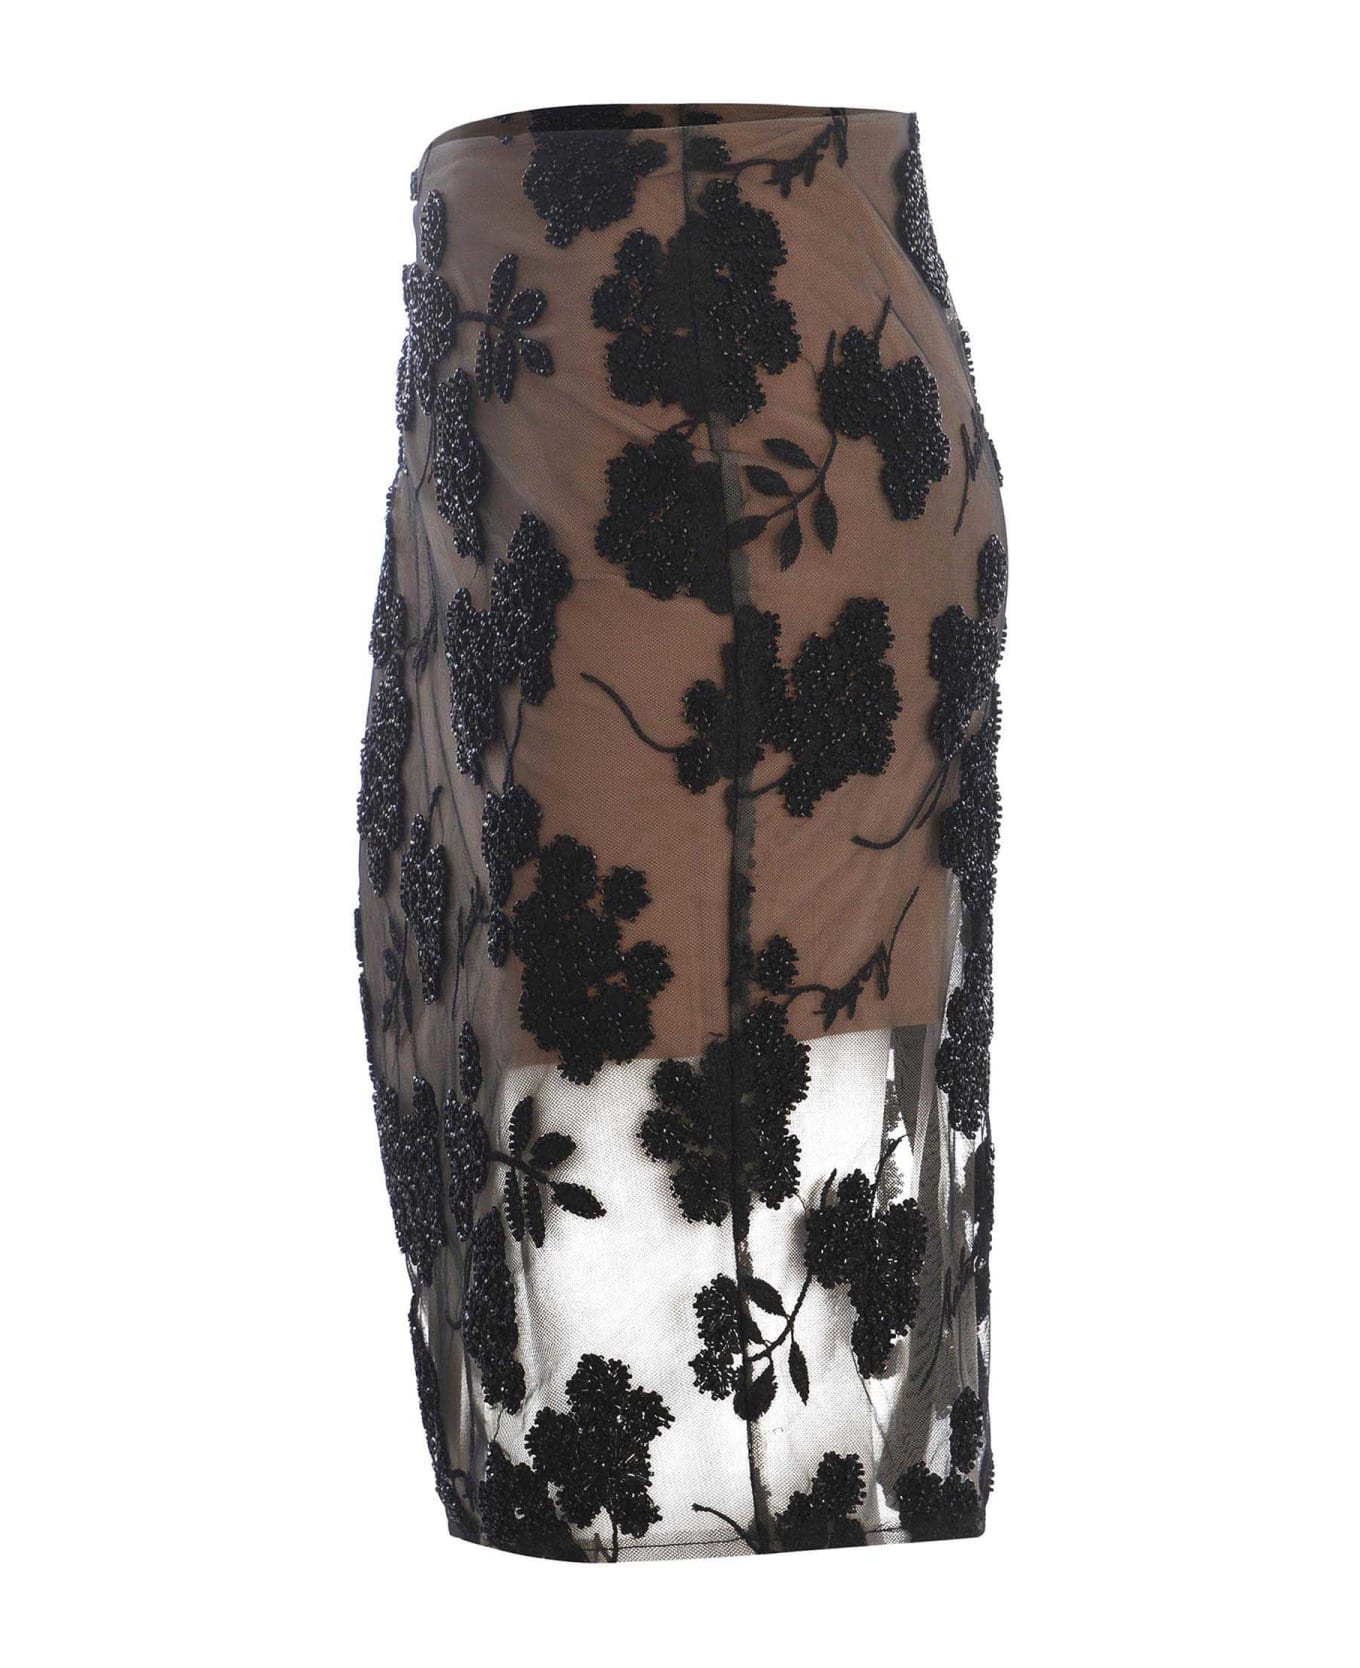 Rotate by Birger Christensen Skirt Rotate "flowers" Made Of Tulle - Nero